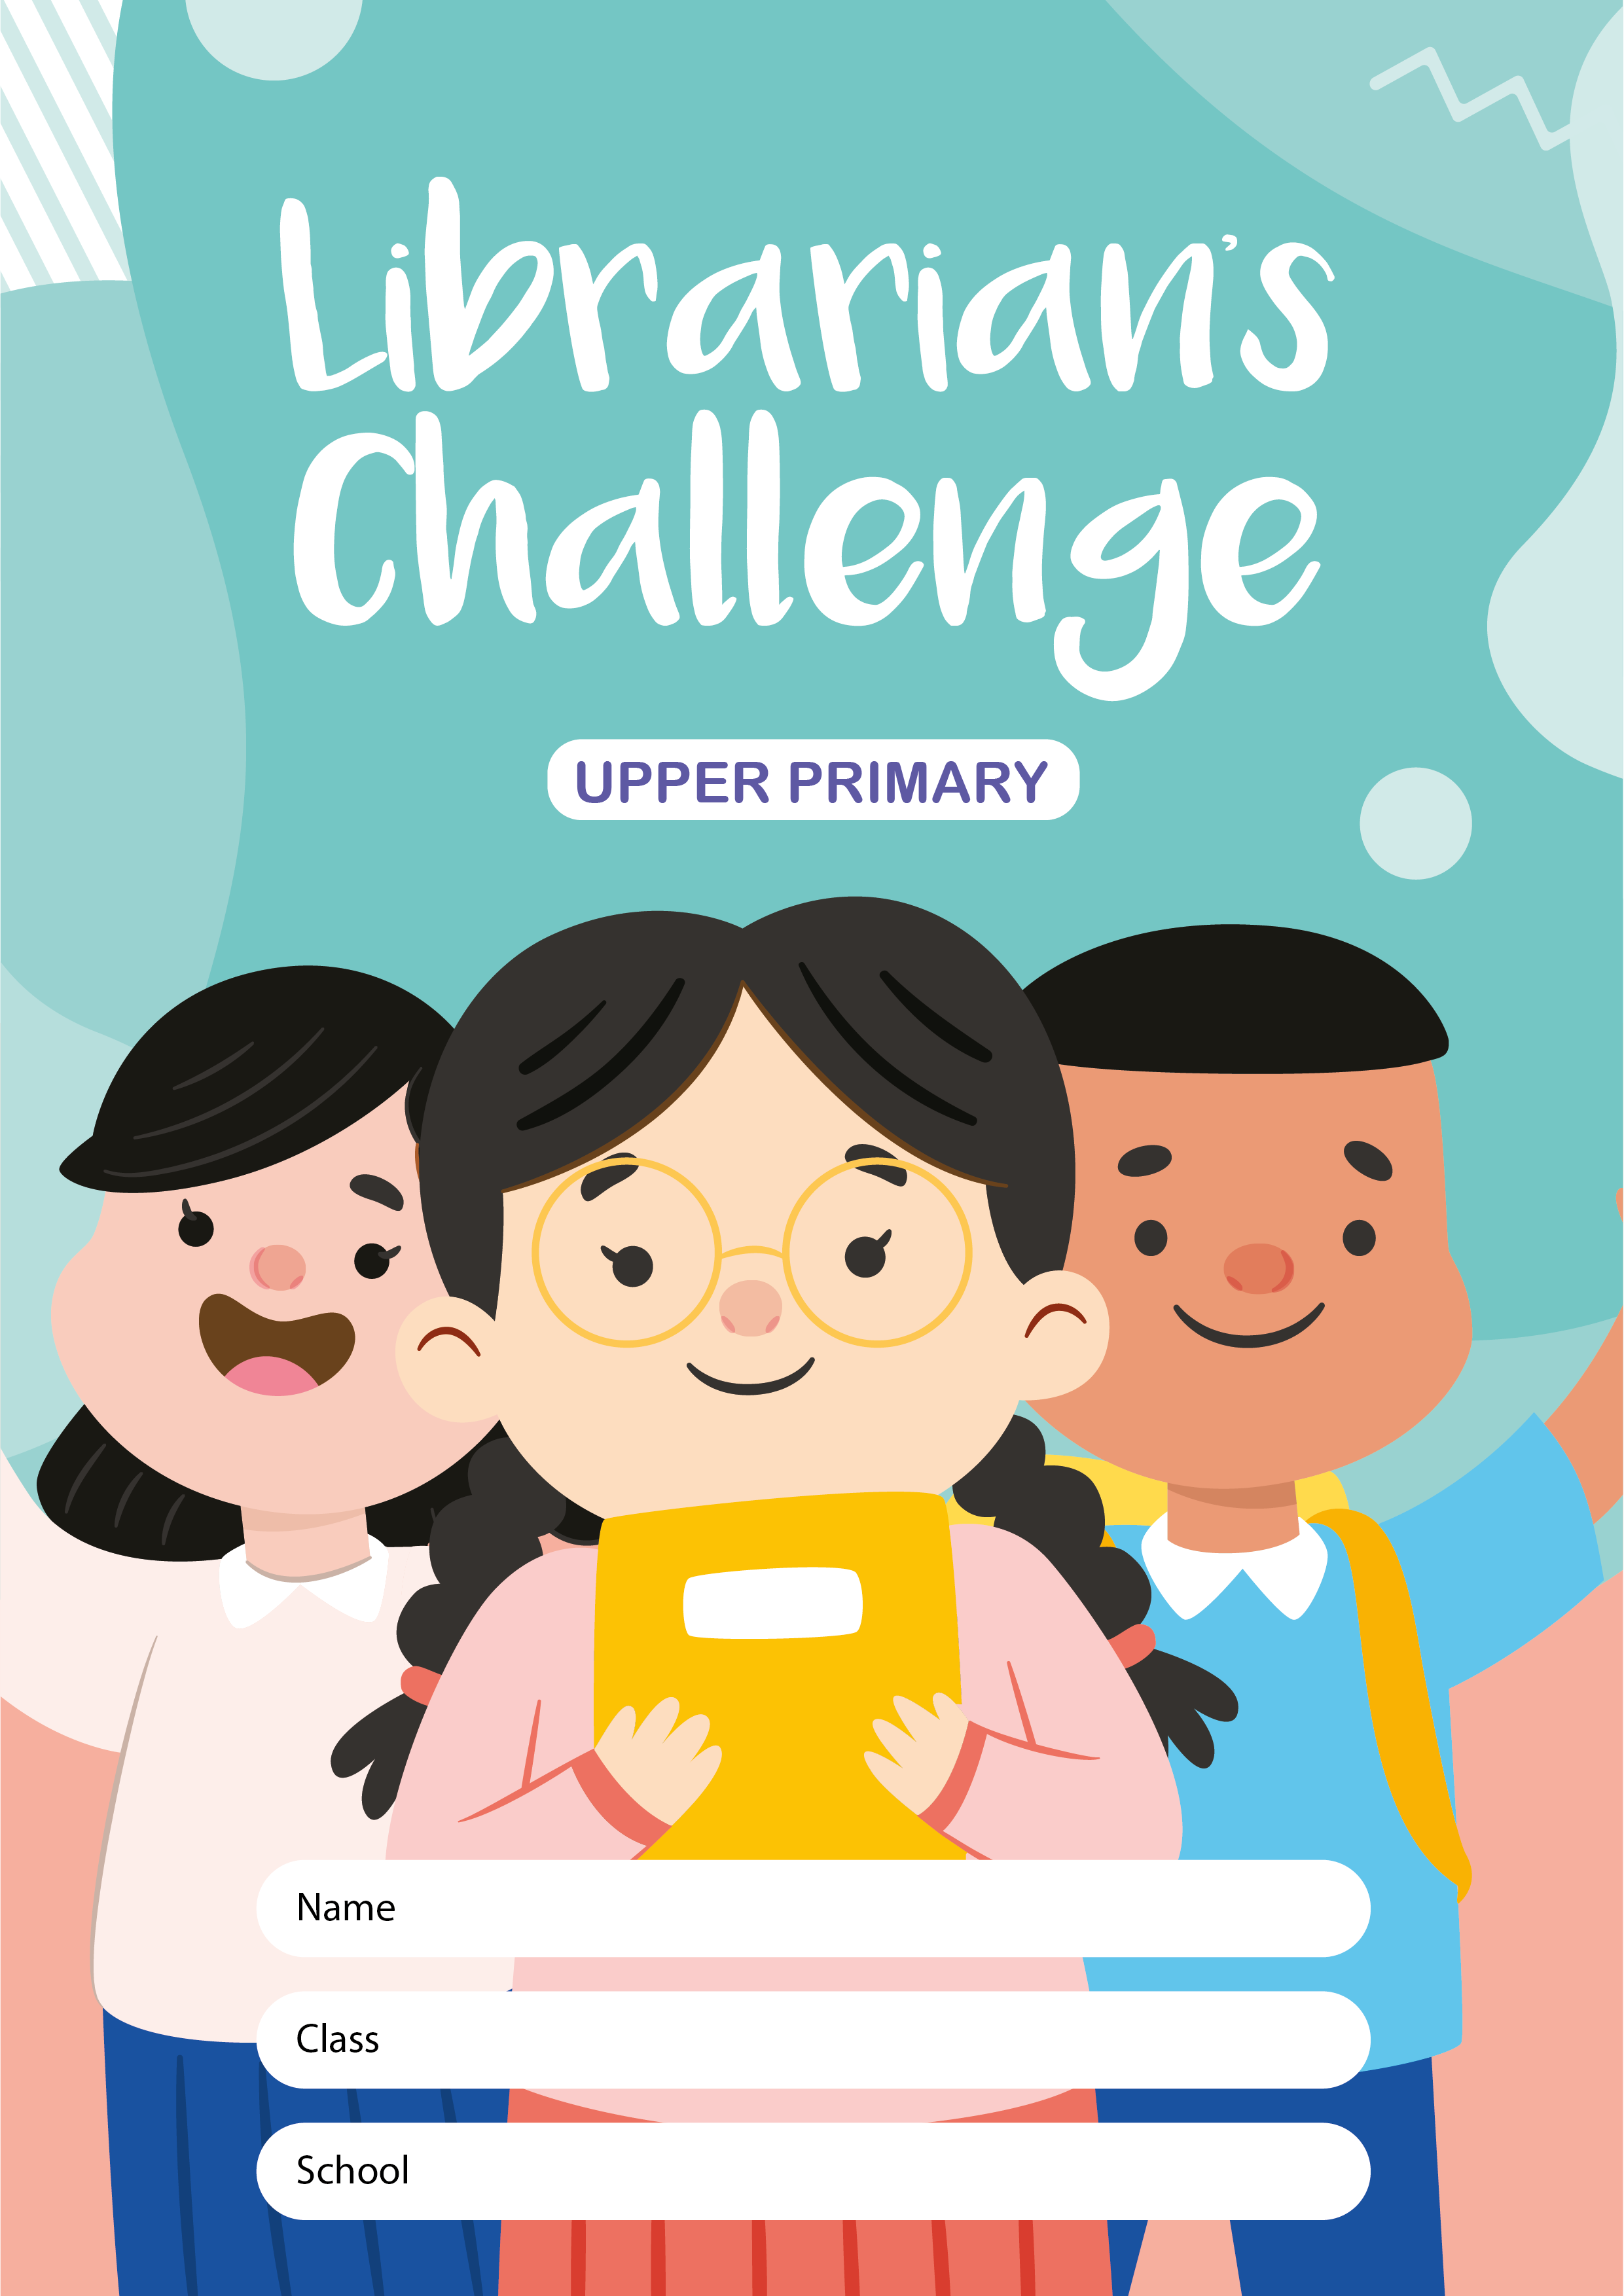 Upper Primary Librarian's Challenge 2021